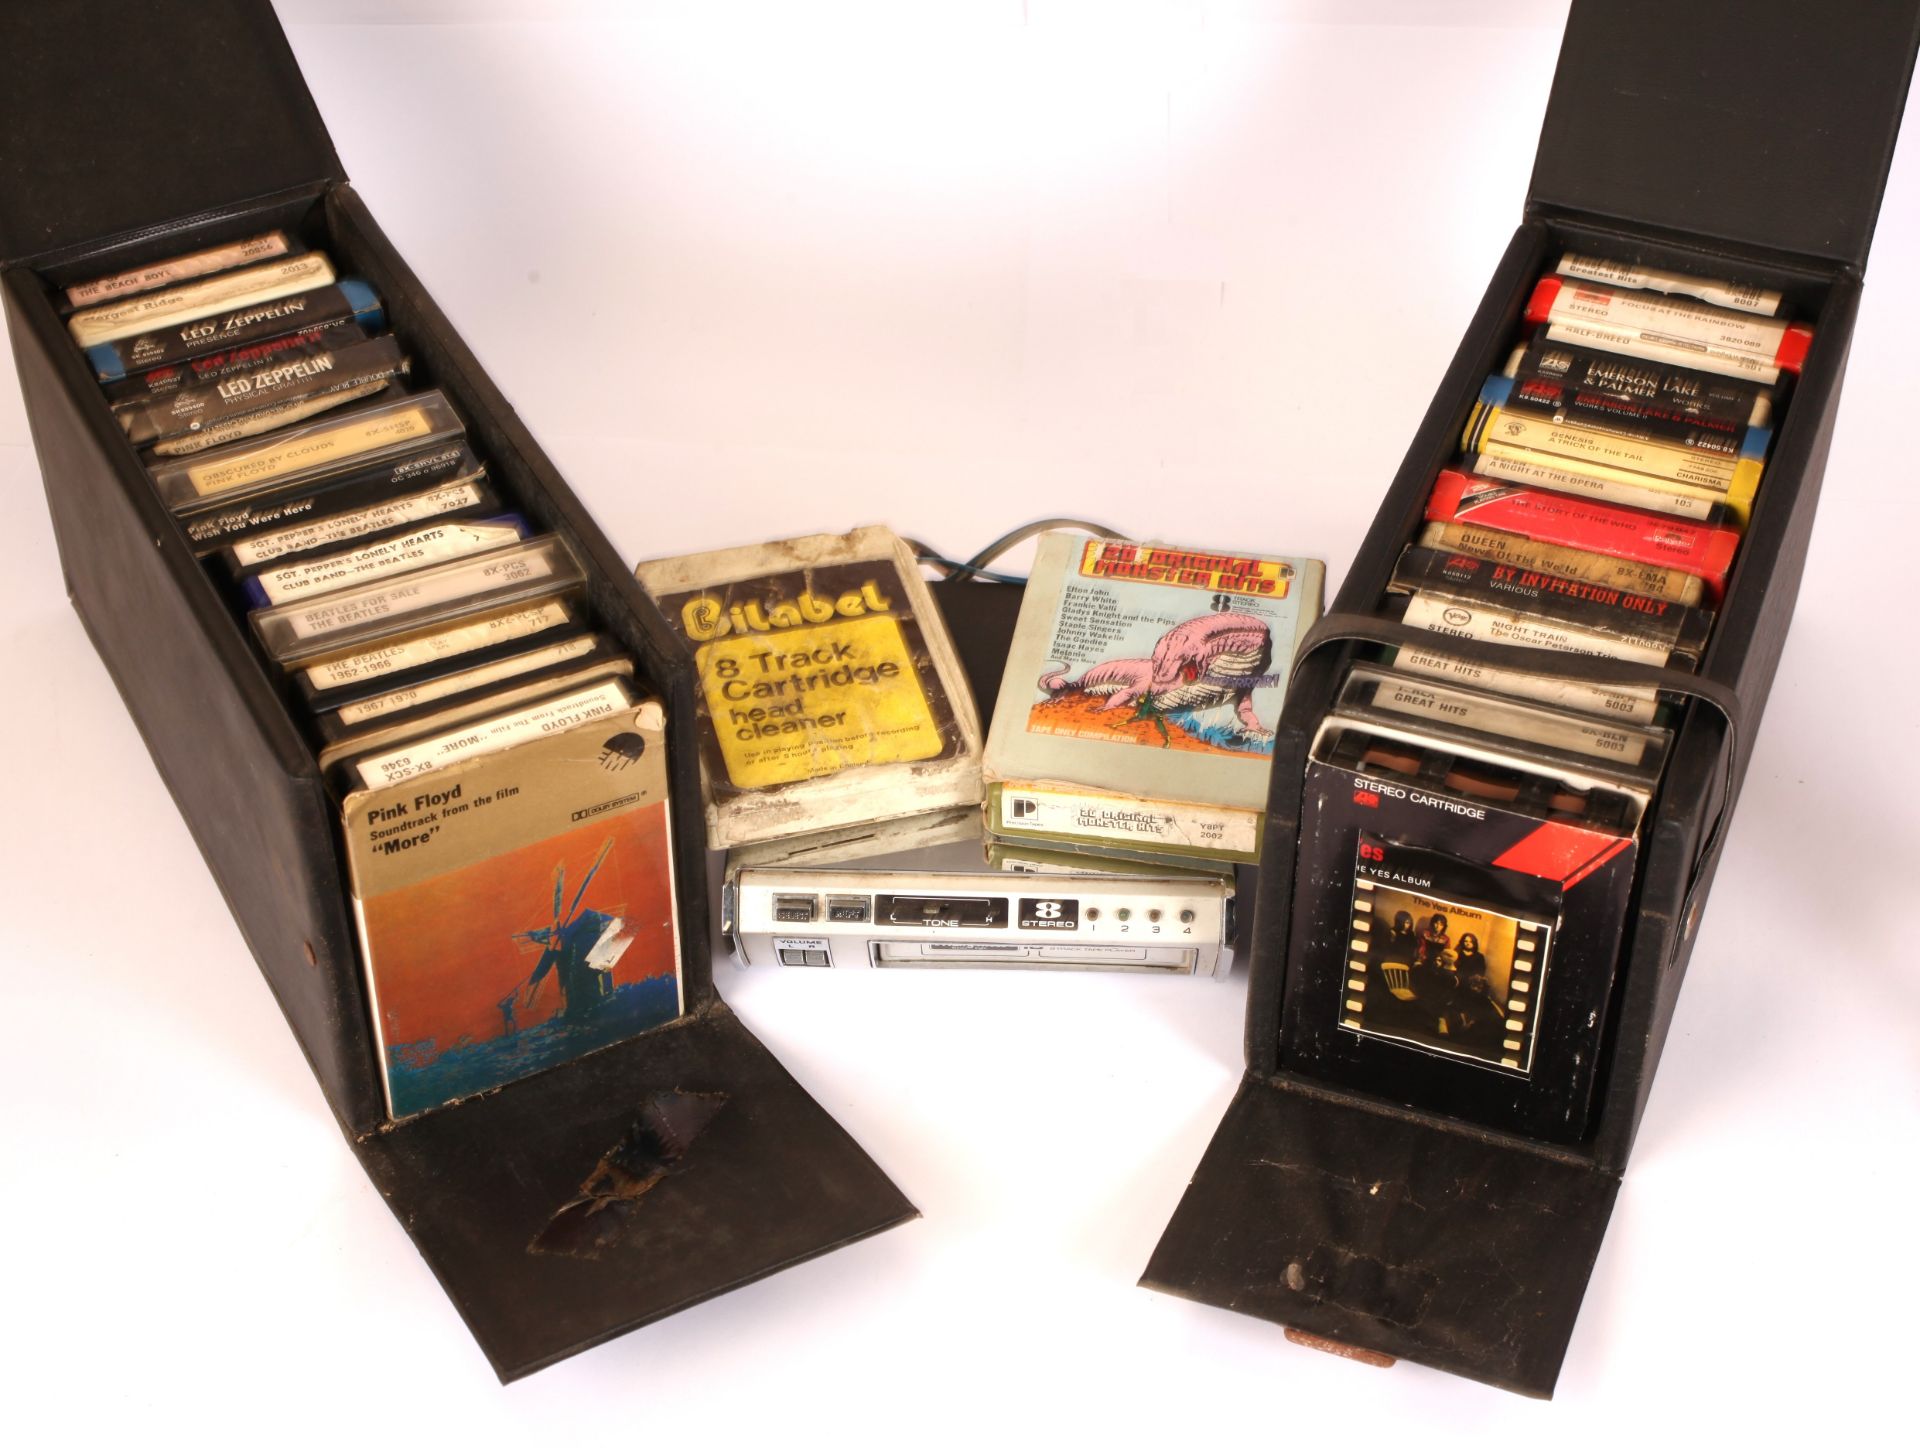 Collection Of 8 Track Cassettes And 8 Track Player